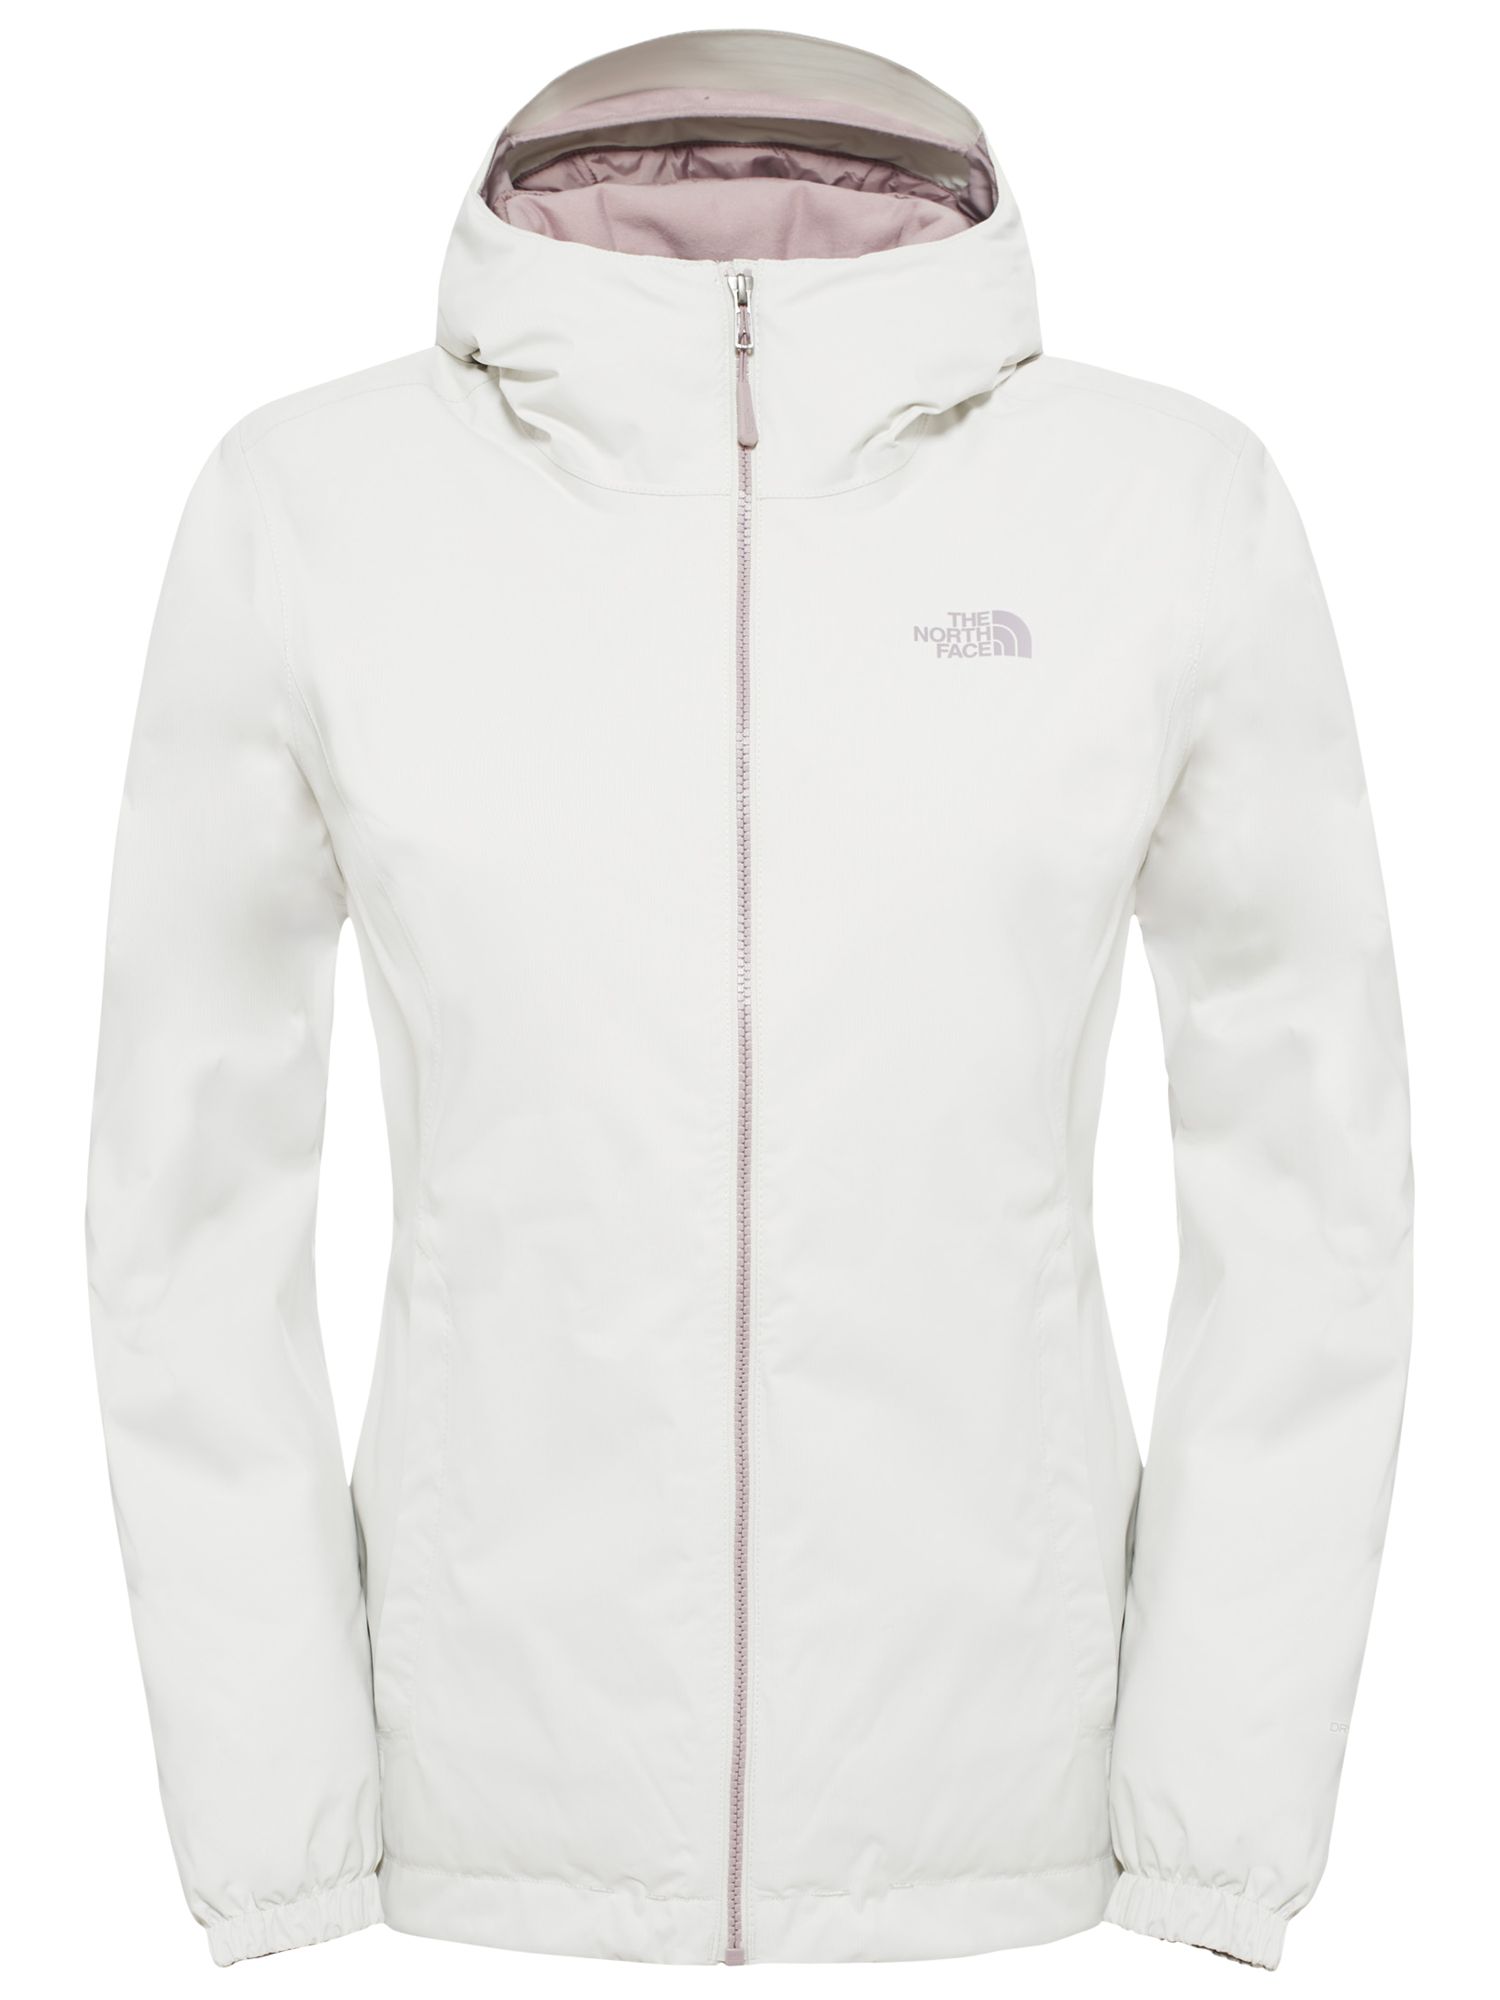 north face women's white jacket